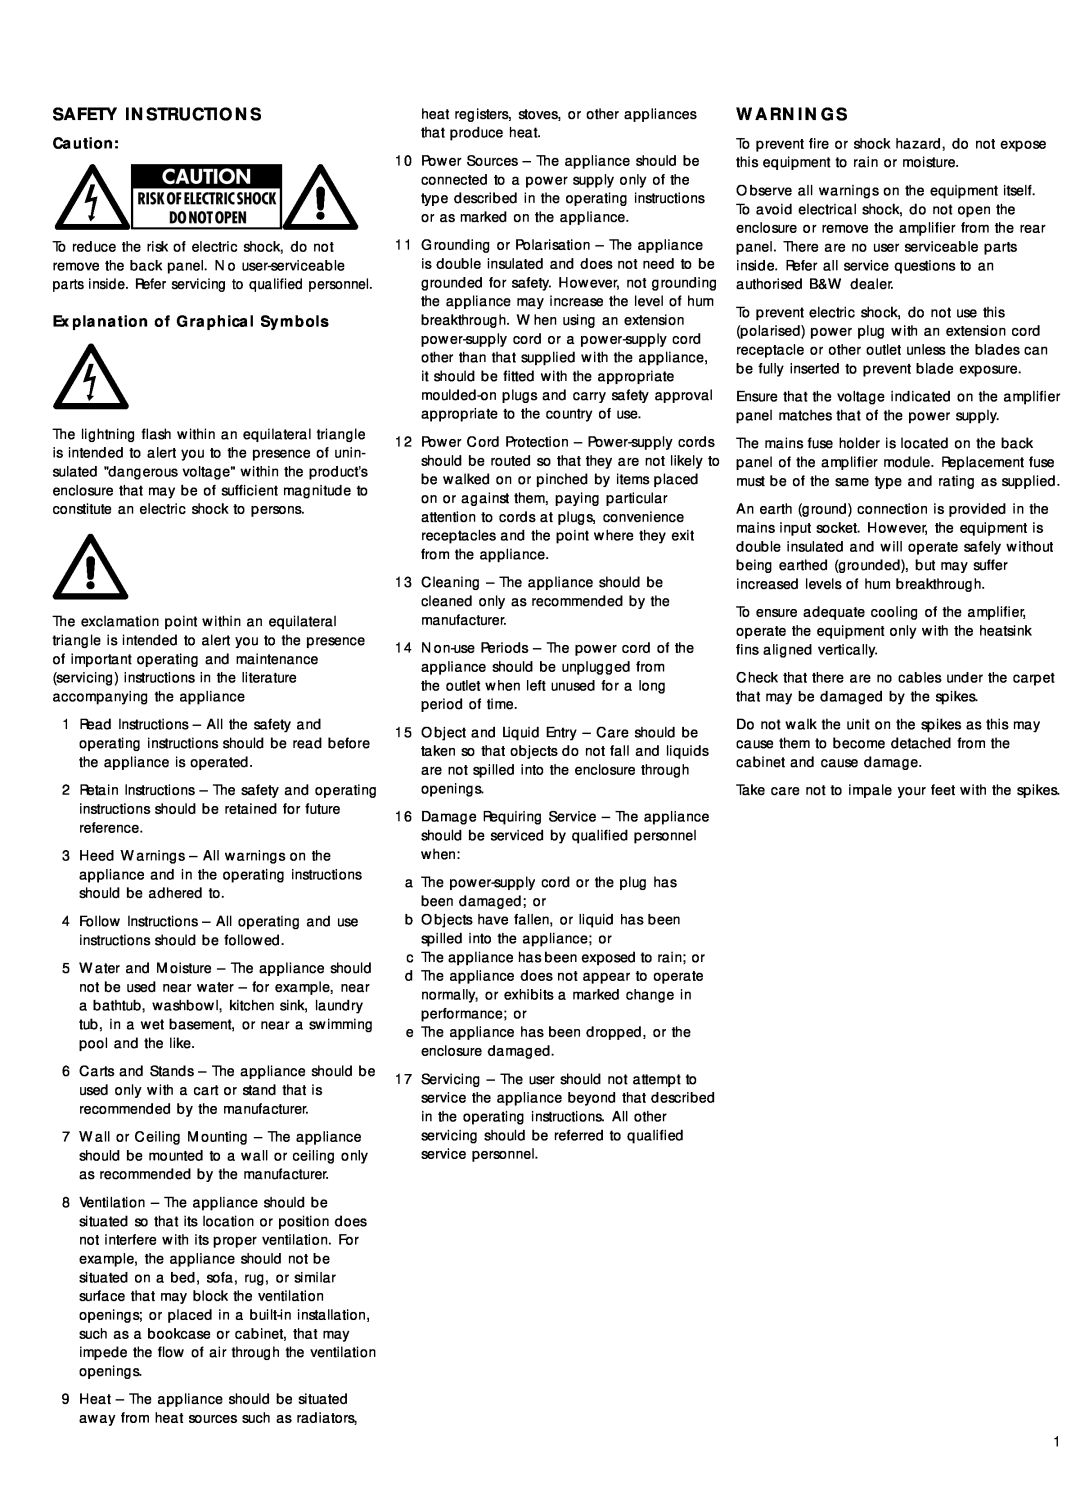 Bowers & Wilkins 600 Series2 owner manual Safety Instructions, Warnings, Explanation of Graphical Symbols 